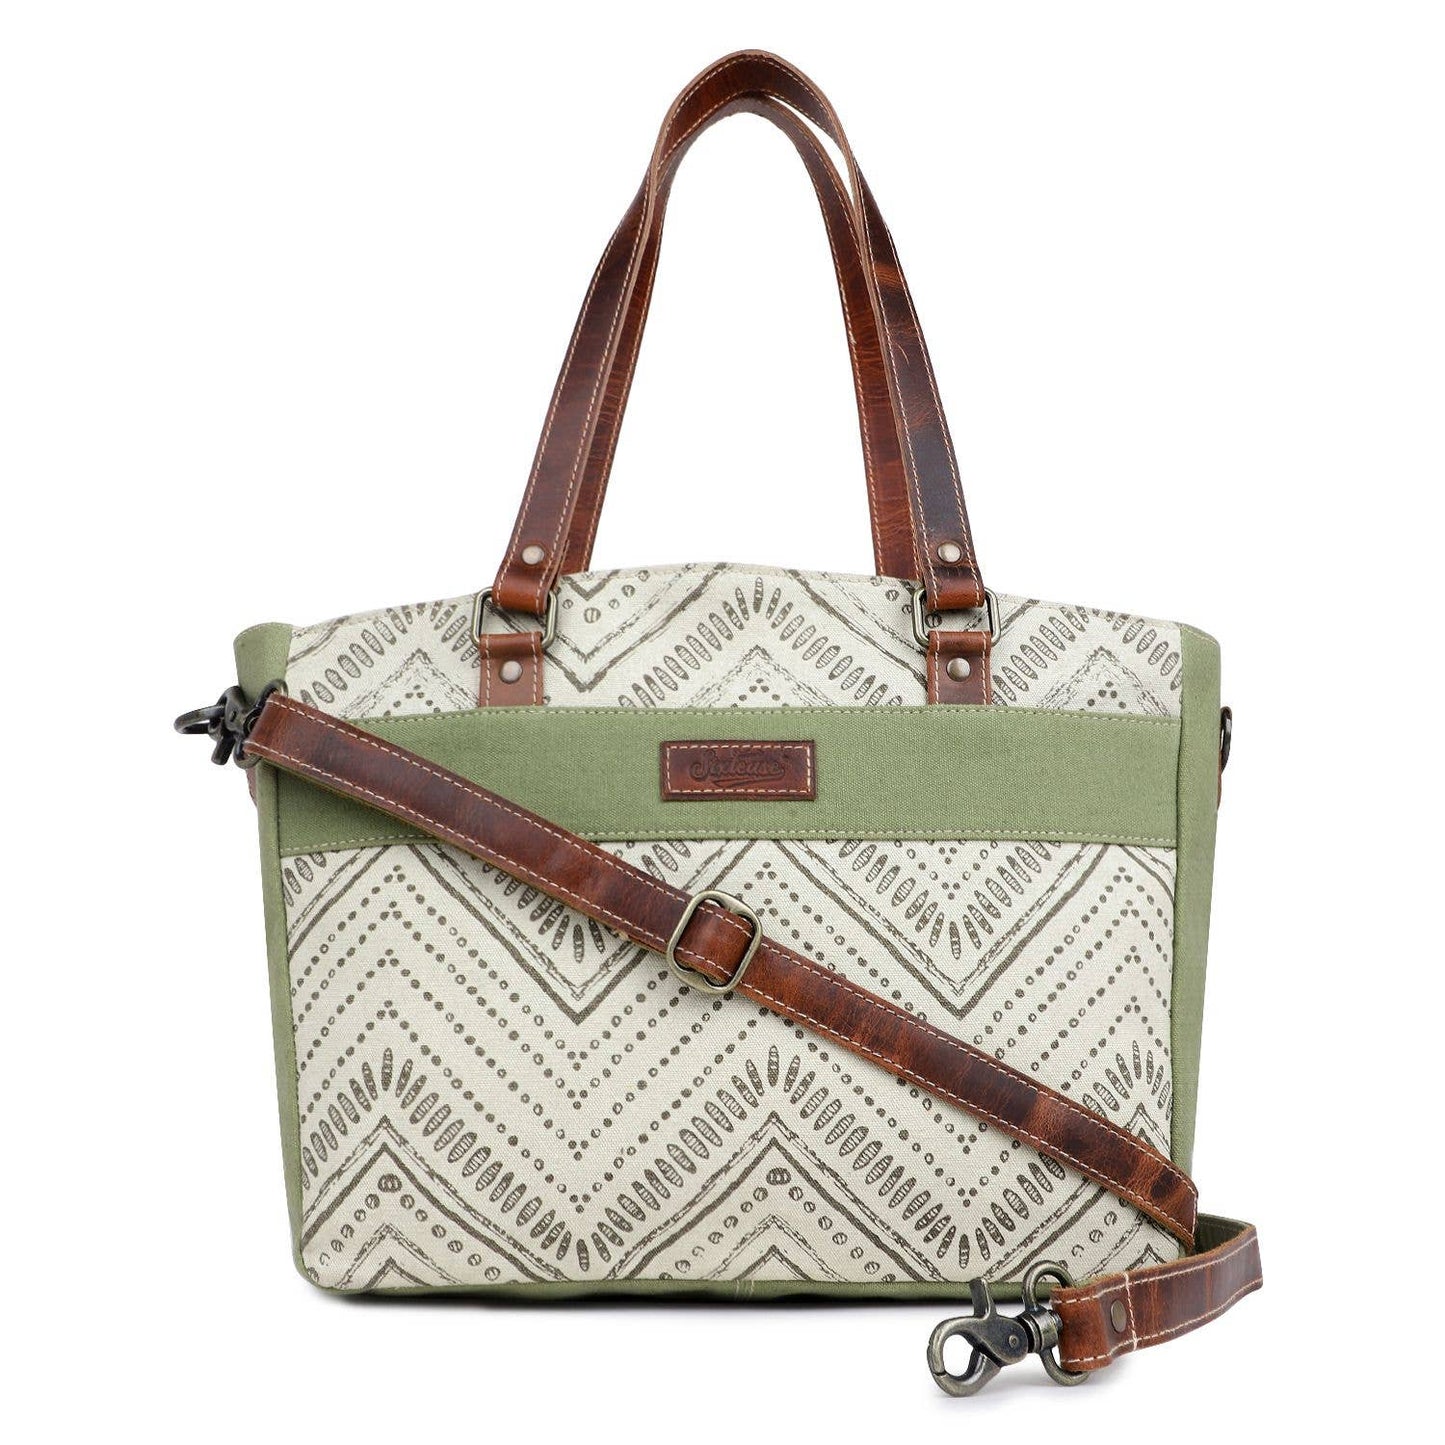 Sixtease Bags USA - The Emerson Tote